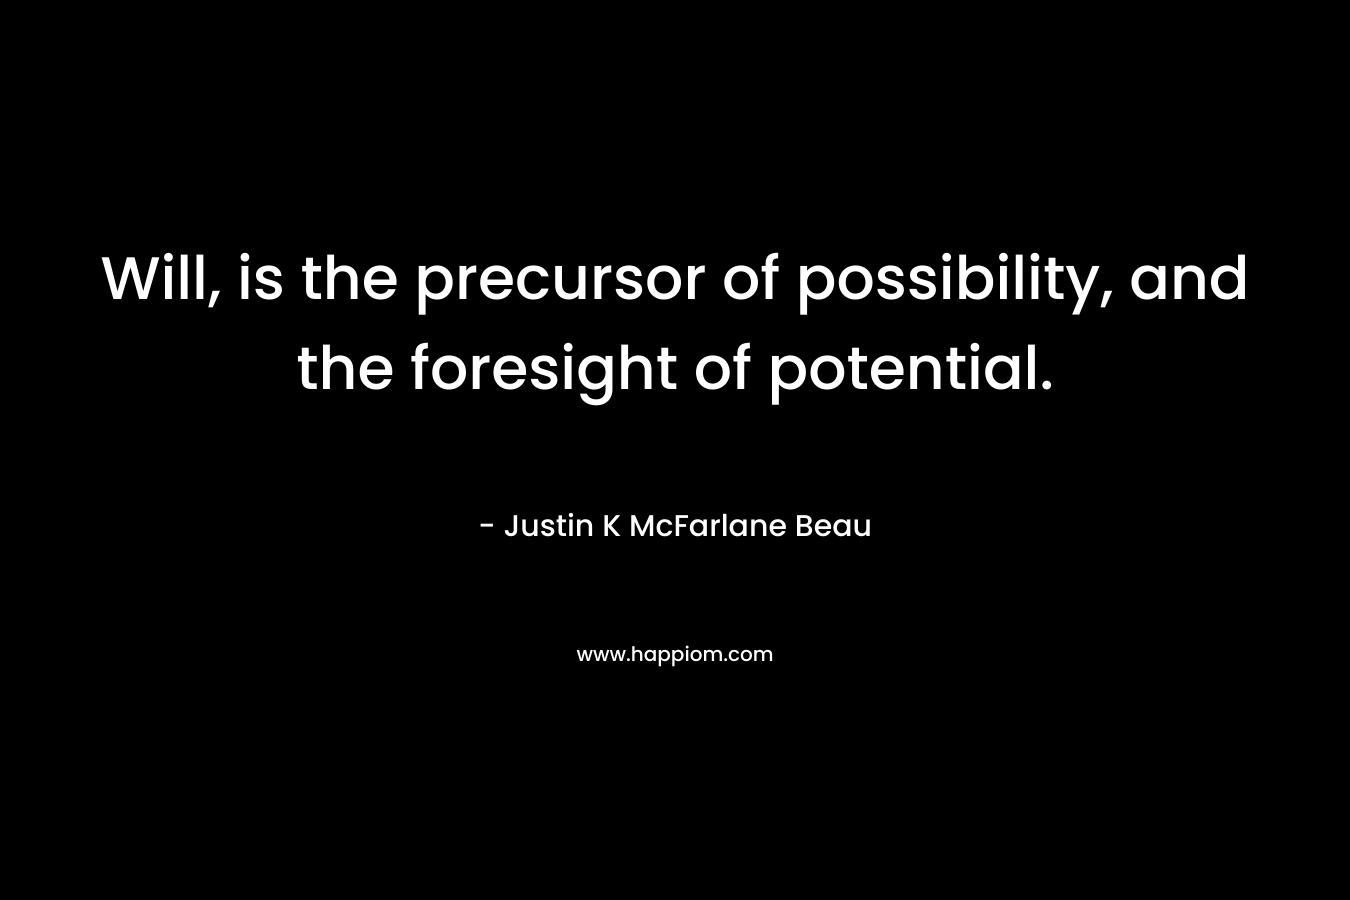 Will, is the precursor of possibility, and the foresight of potential.